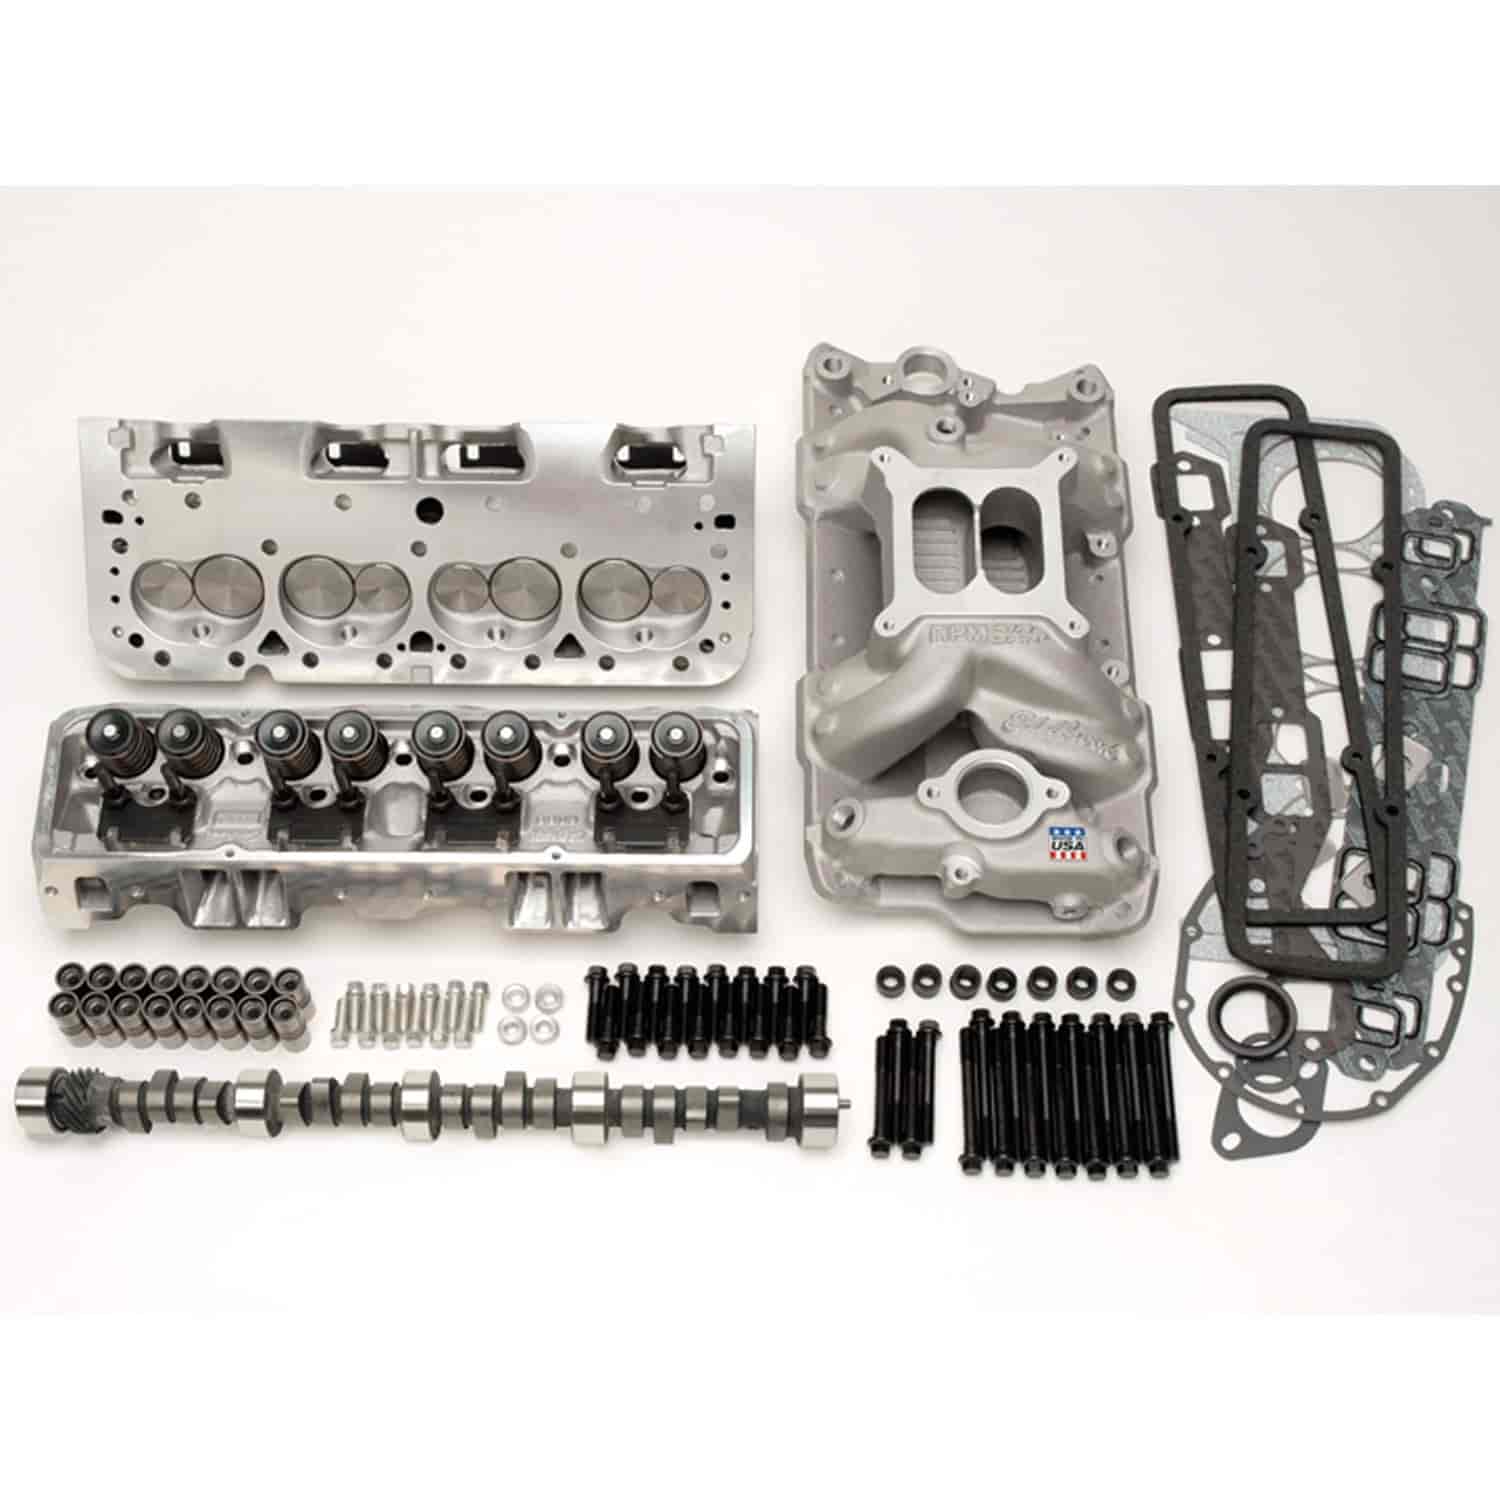 RPM Power Package Top End Kit for Pontiac